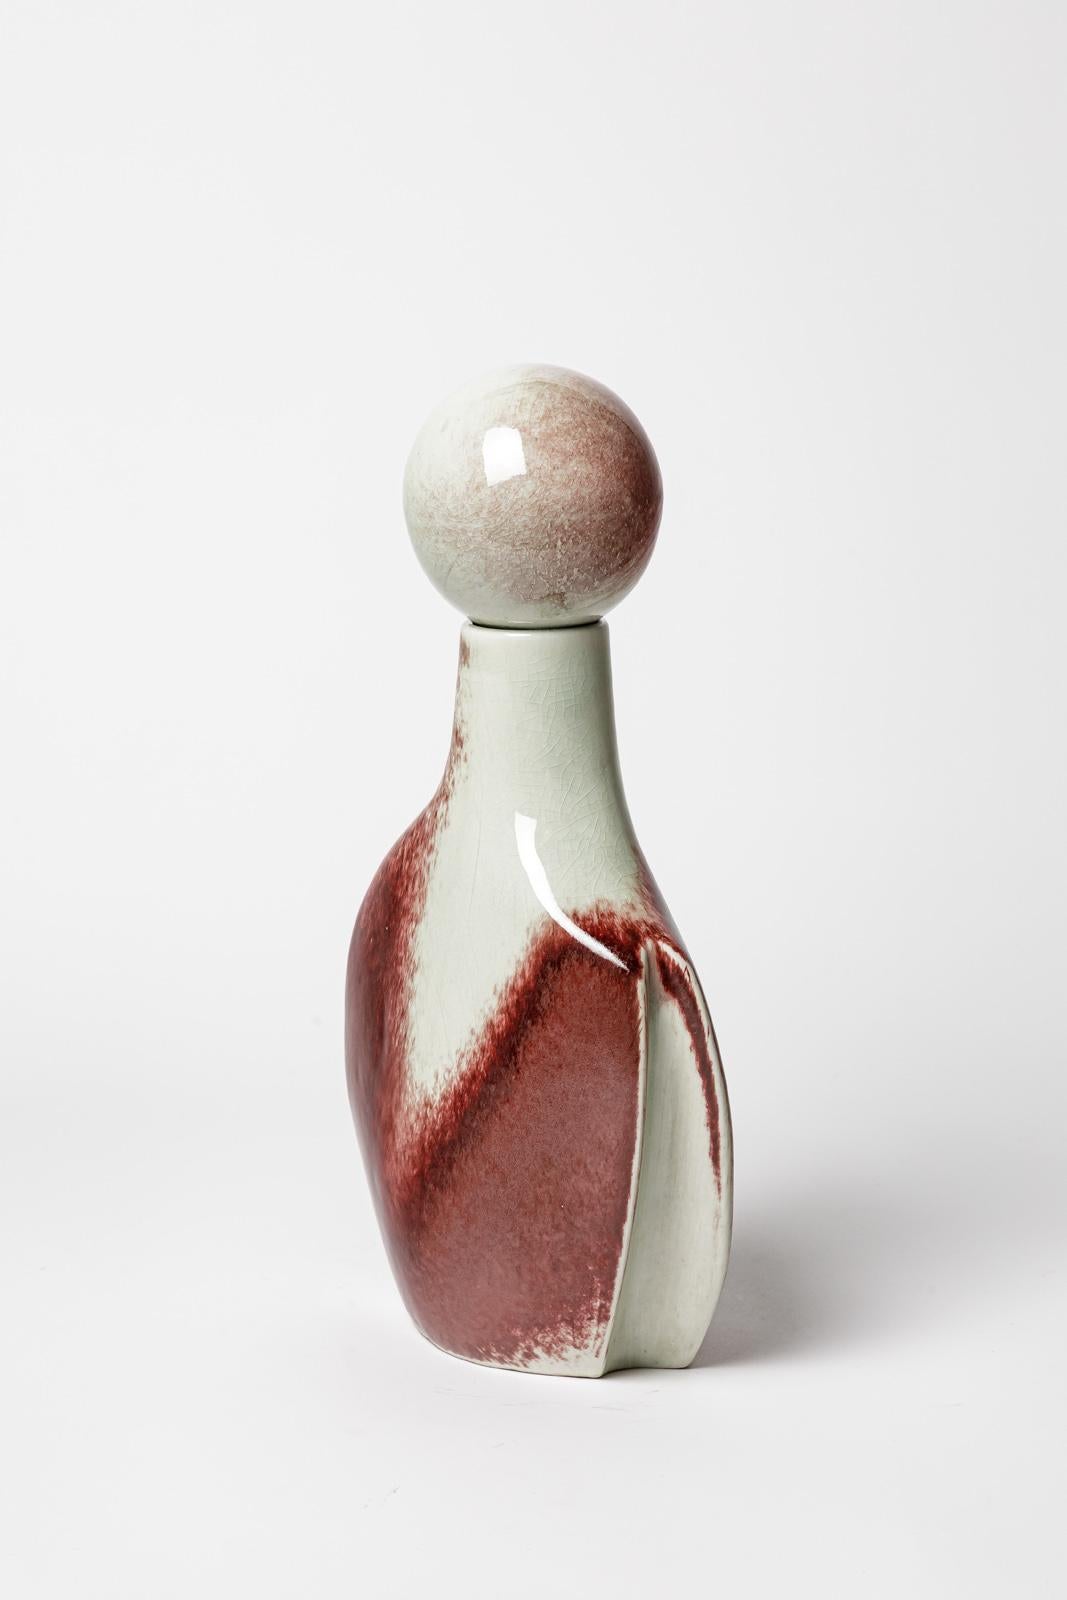 Mid-Century Modern Red and white porcelain ceramic vase or bottle by Jacqueline and Tim Orr 1970 For Sale